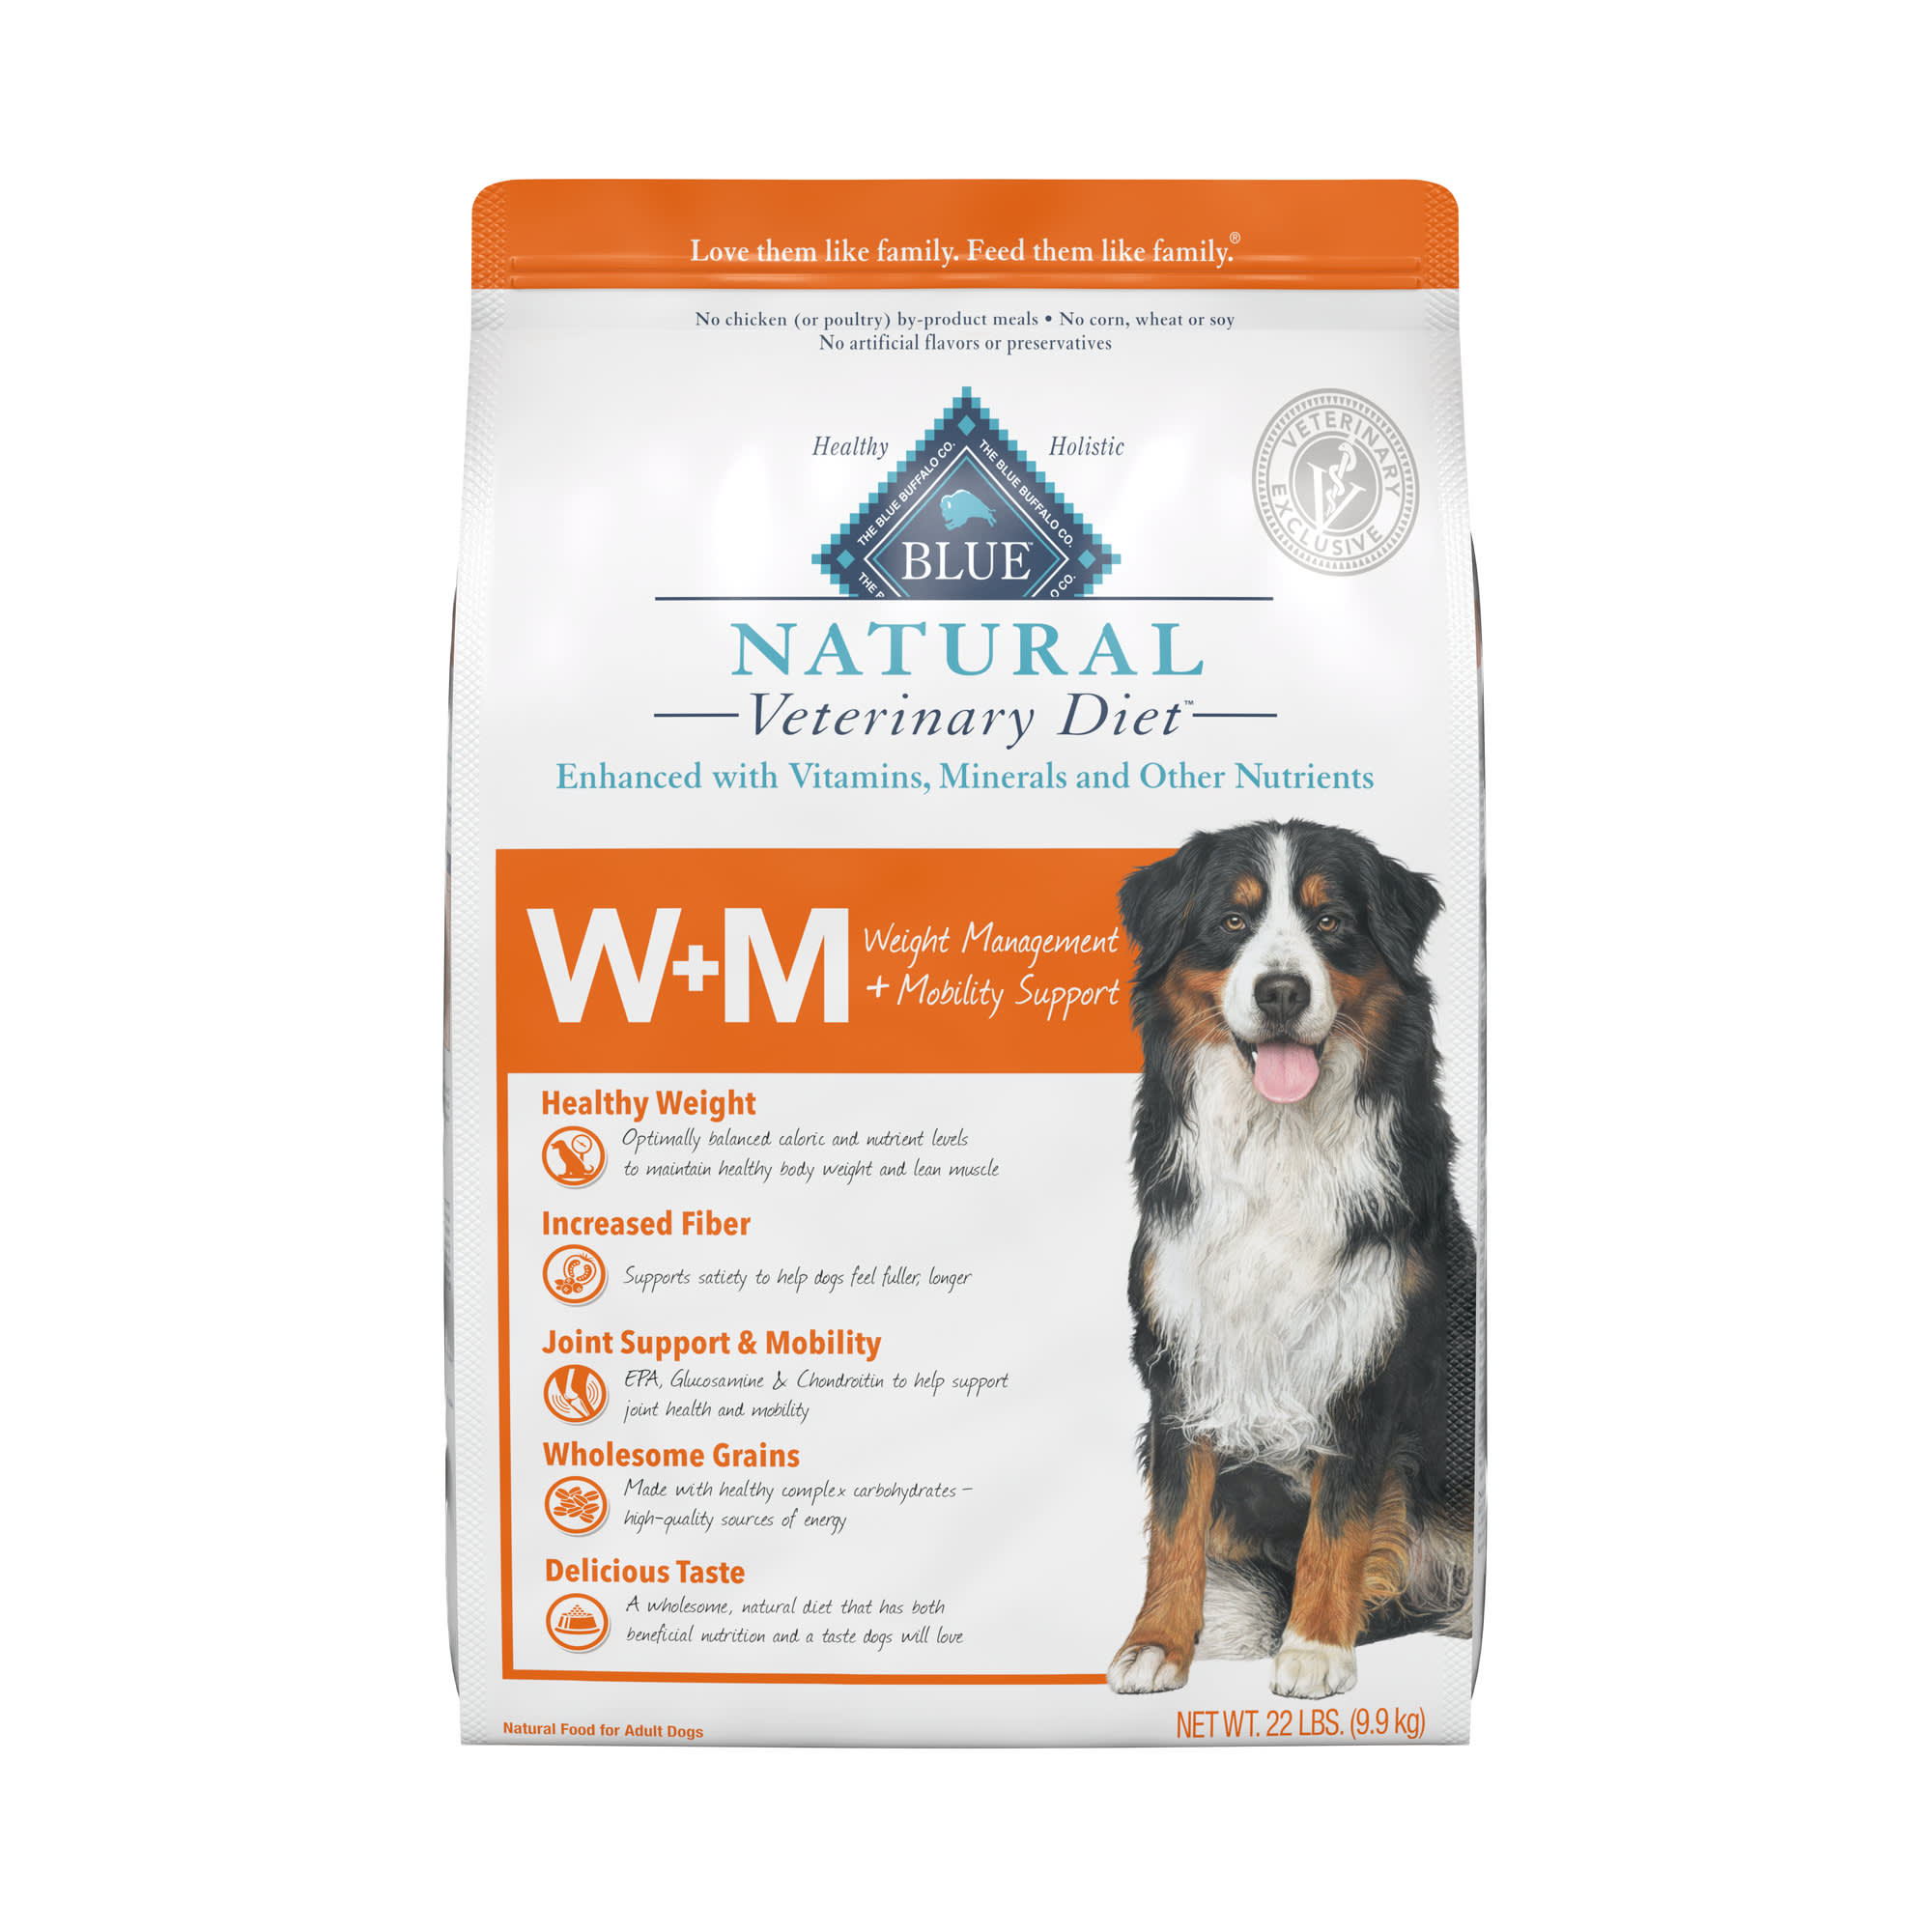 Blue Buffalo Natural Veterinary Diet W+M Weight Management + Mobility Support Salmon Dry Dog Food, lbs. | Petco